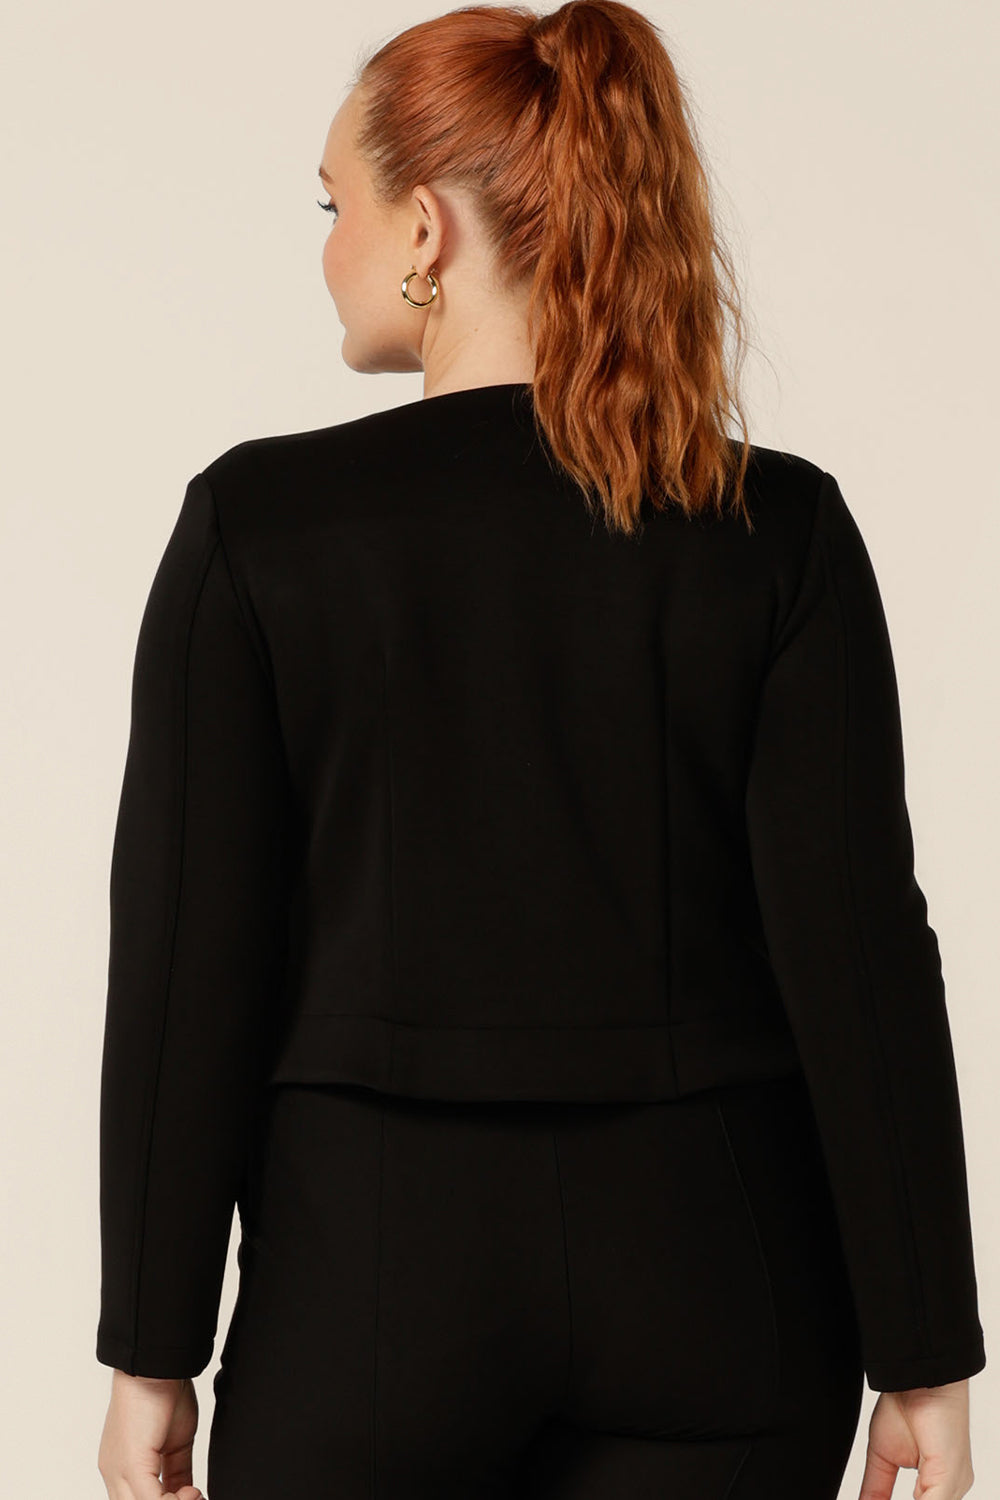 Back view of a classic workwear jacket by Australian and New Zealand women's clothing label, L&F. The Yuri Jacket in Black is a collarless, open-front, soft tailored jacket. Shown here in a size 12, the jacket is worn with black tailored pants to create a work suit look, and a V-neck top in orange. 